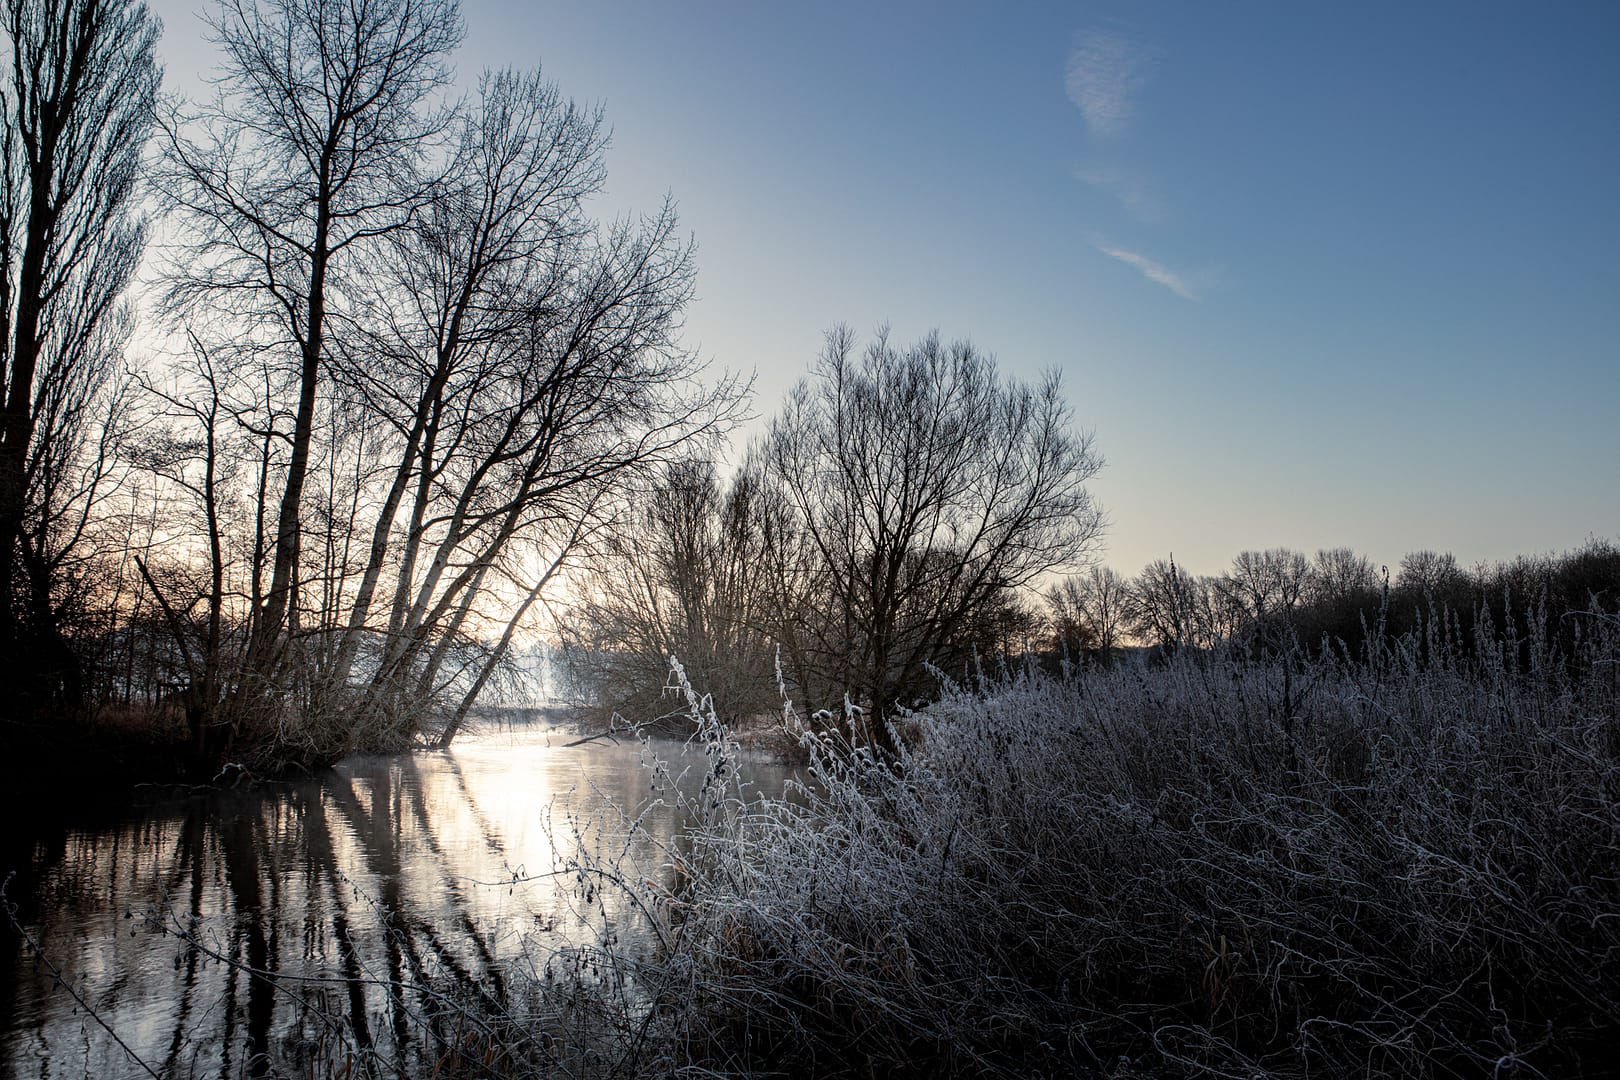 Countryside sunrise over the River Kennet on a cold frosty morning.